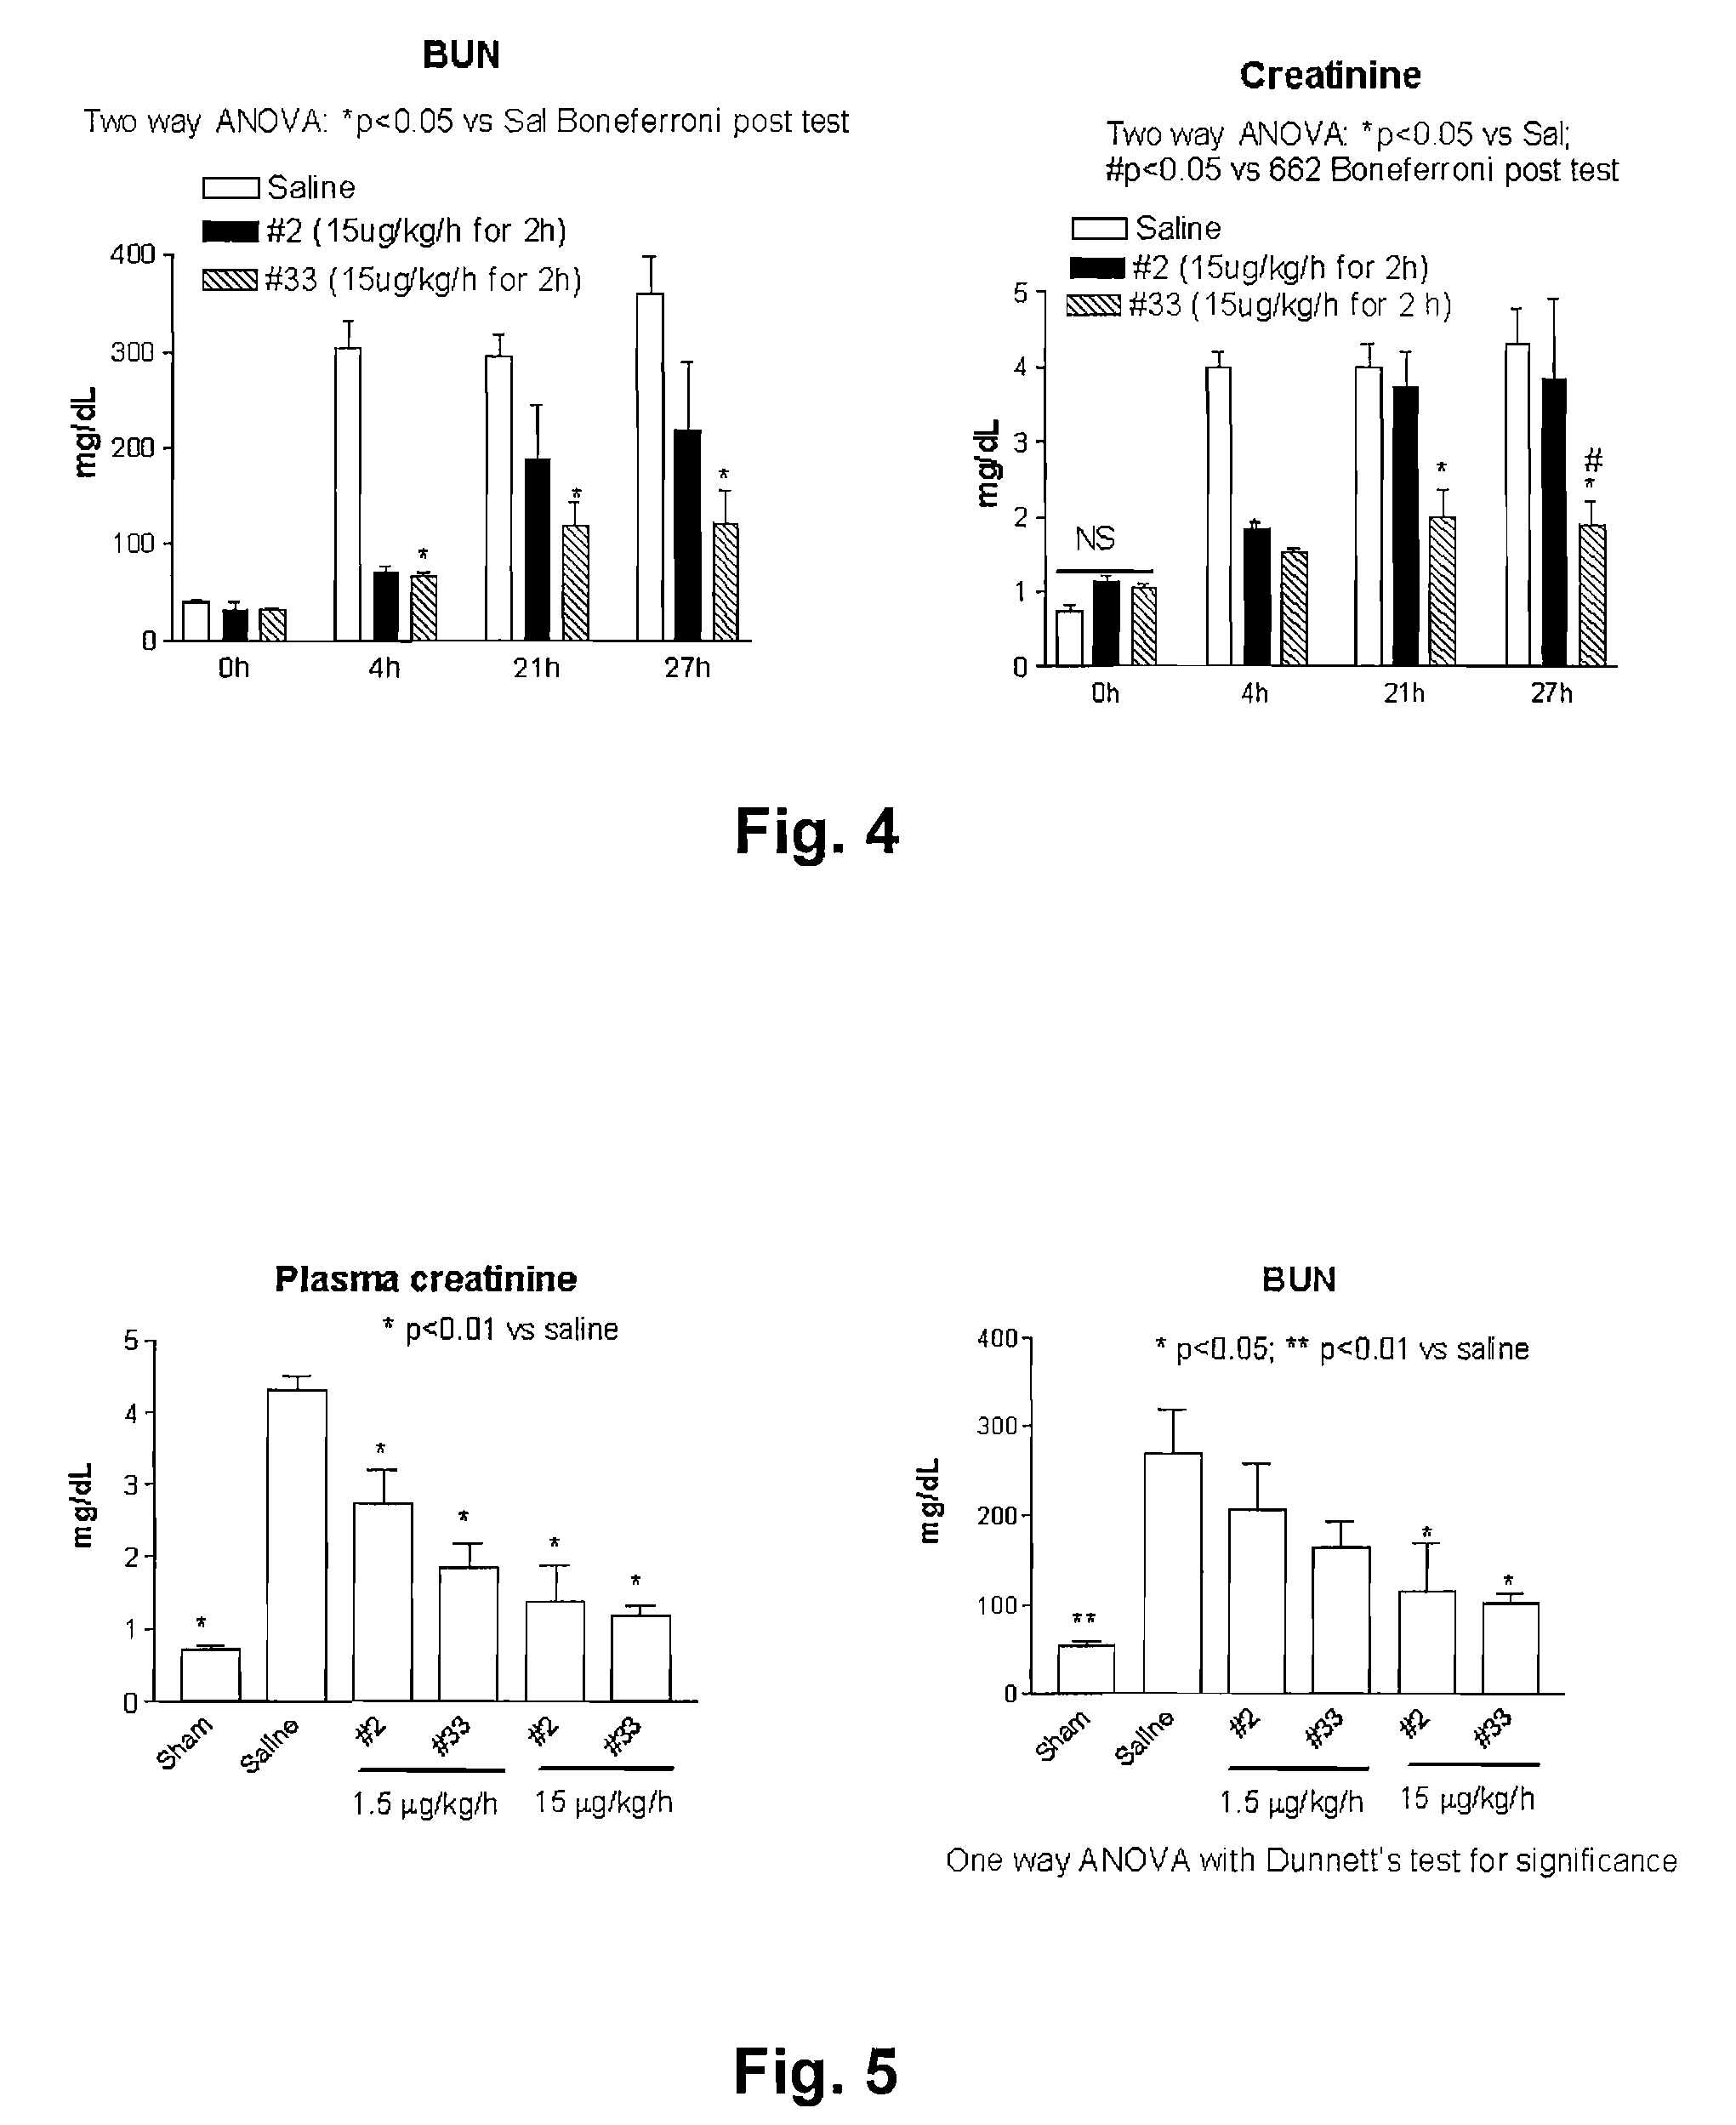 Bifunctional hormone having alpha-MSH activity and natriuretic peptide activity and uses thereof